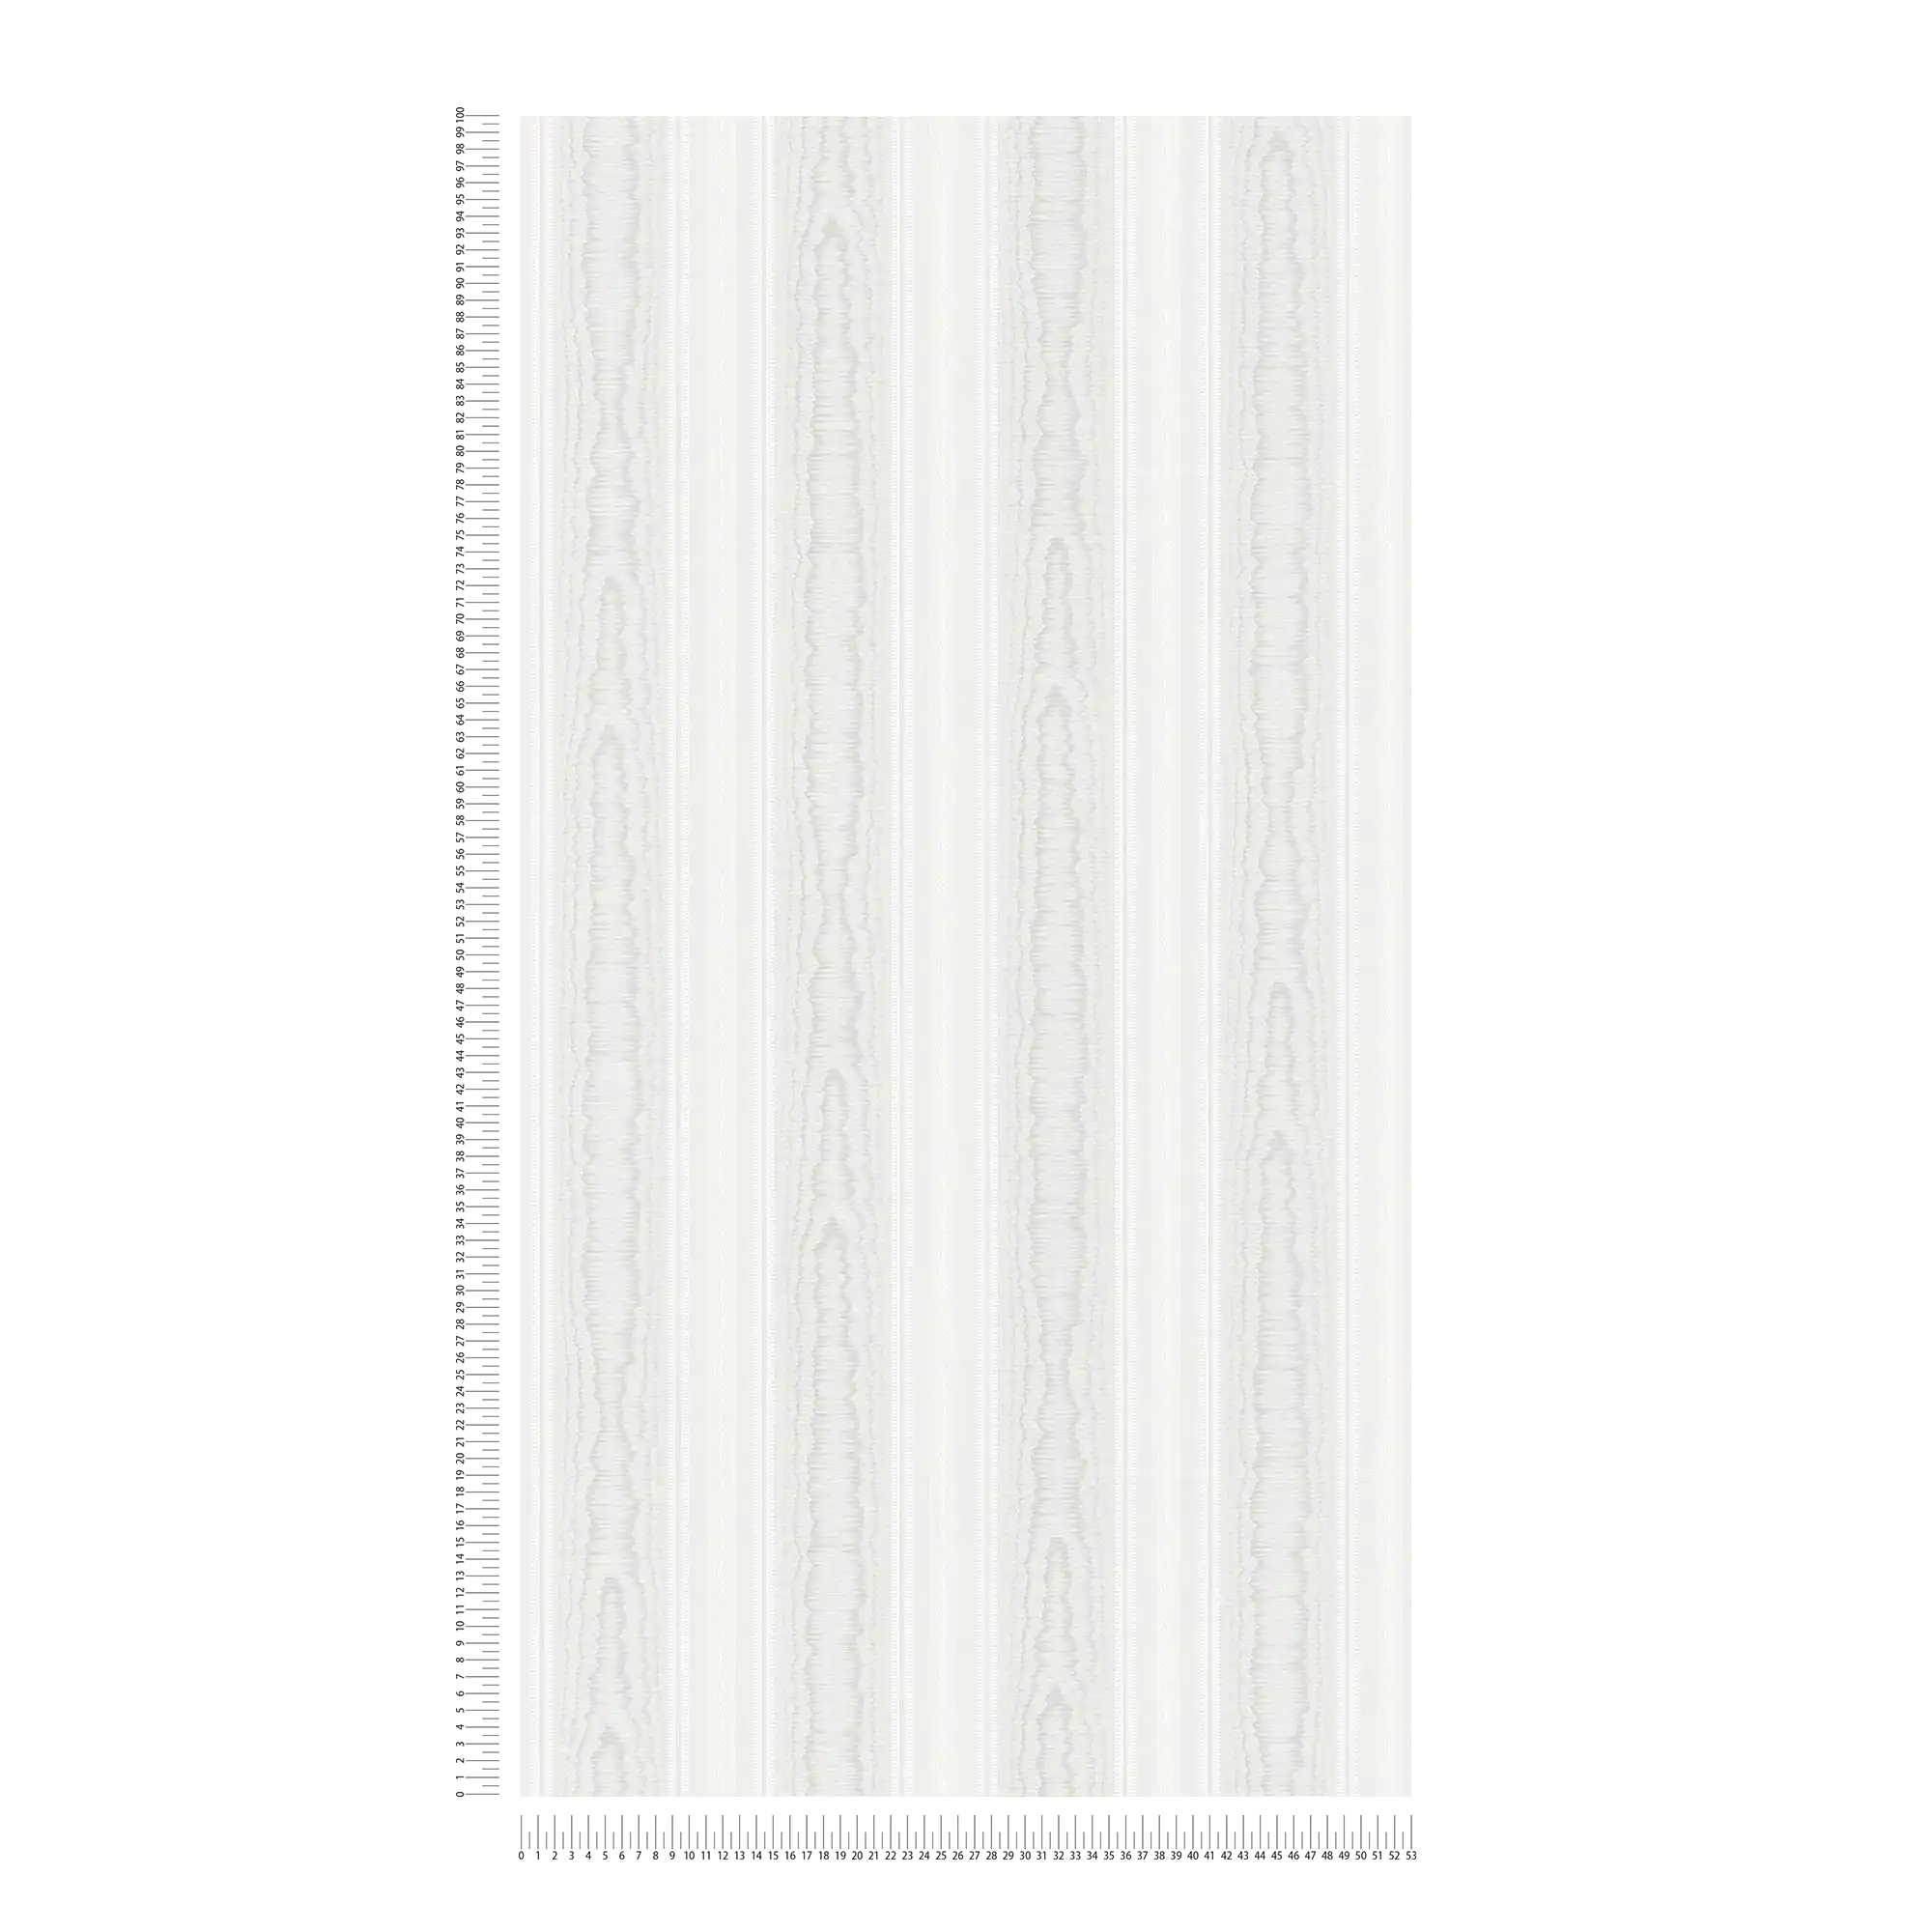             Striped wallpaper patterned with wood look - cream, white
        